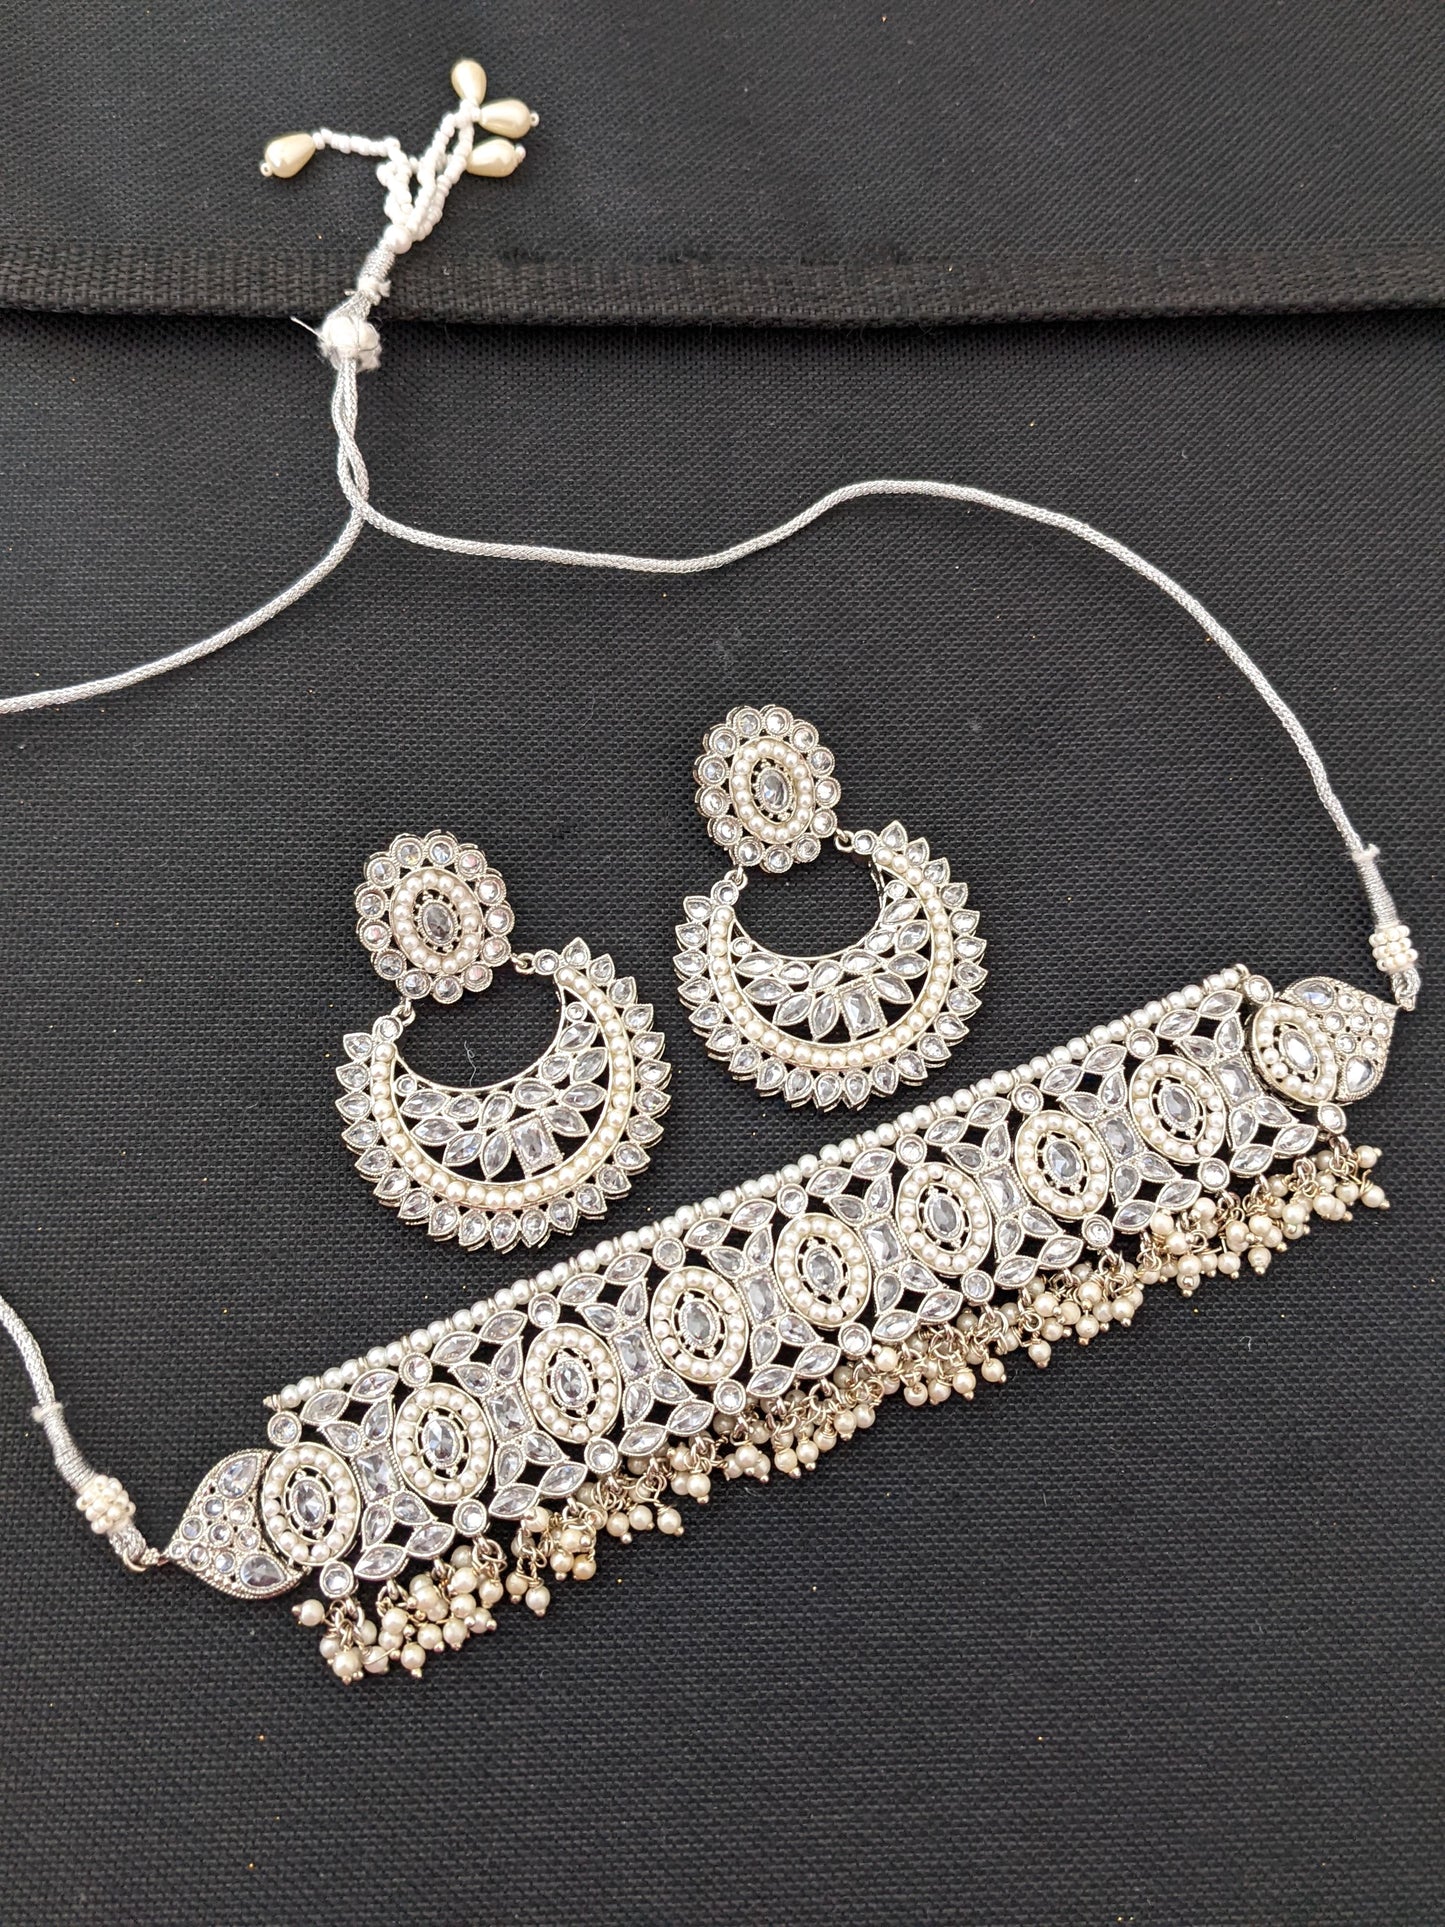 Silver rhodium polished - Chick collar style choker necklace and Ramleela style earring set - Simpliful